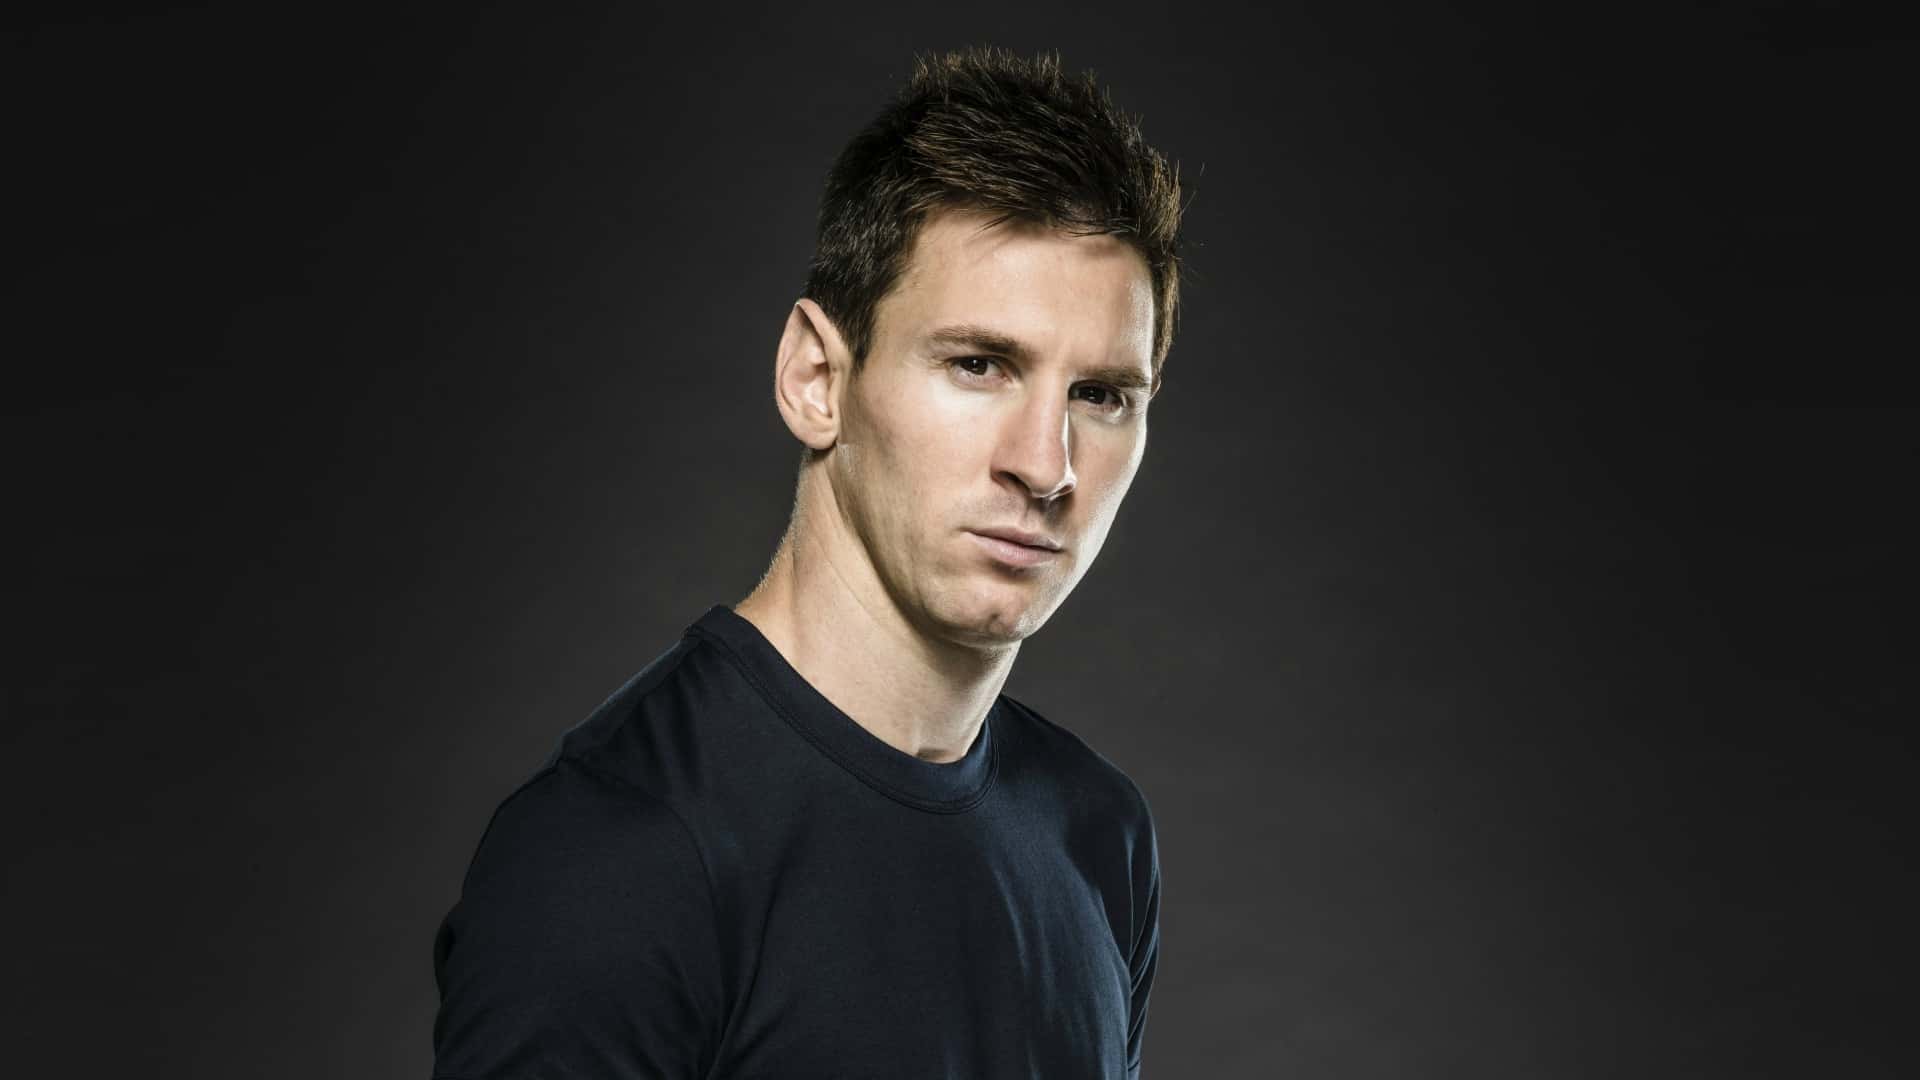 40 winning messi haircuts - (2019) charming looks for guys